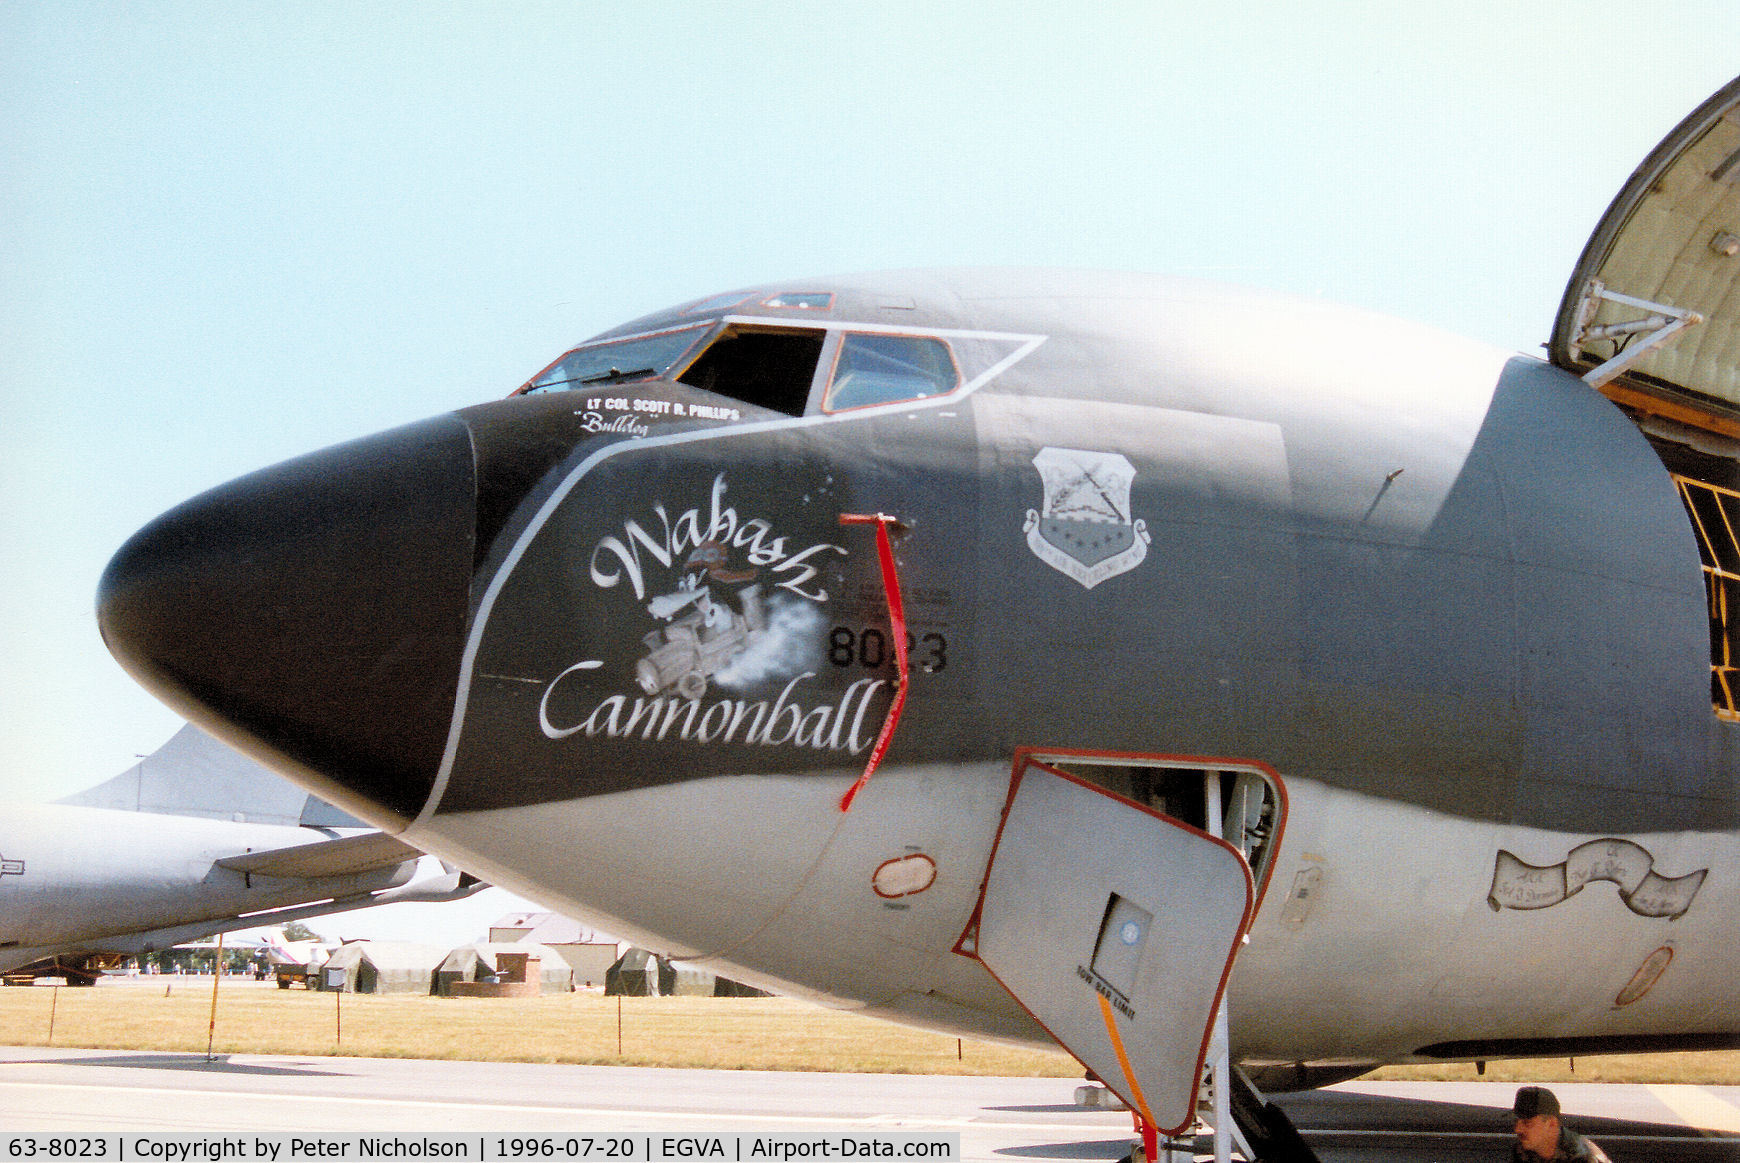 63-8023, 1963 Boeing KC-135R Stratotanker C/N 18640, KC-135R Stratotanker named Wabash Cannonball of RAF Mildenhall's 100th Air Refuelling Wing on display at the 1996 Royal Intnl Air Tattoo at RAF Fairford.